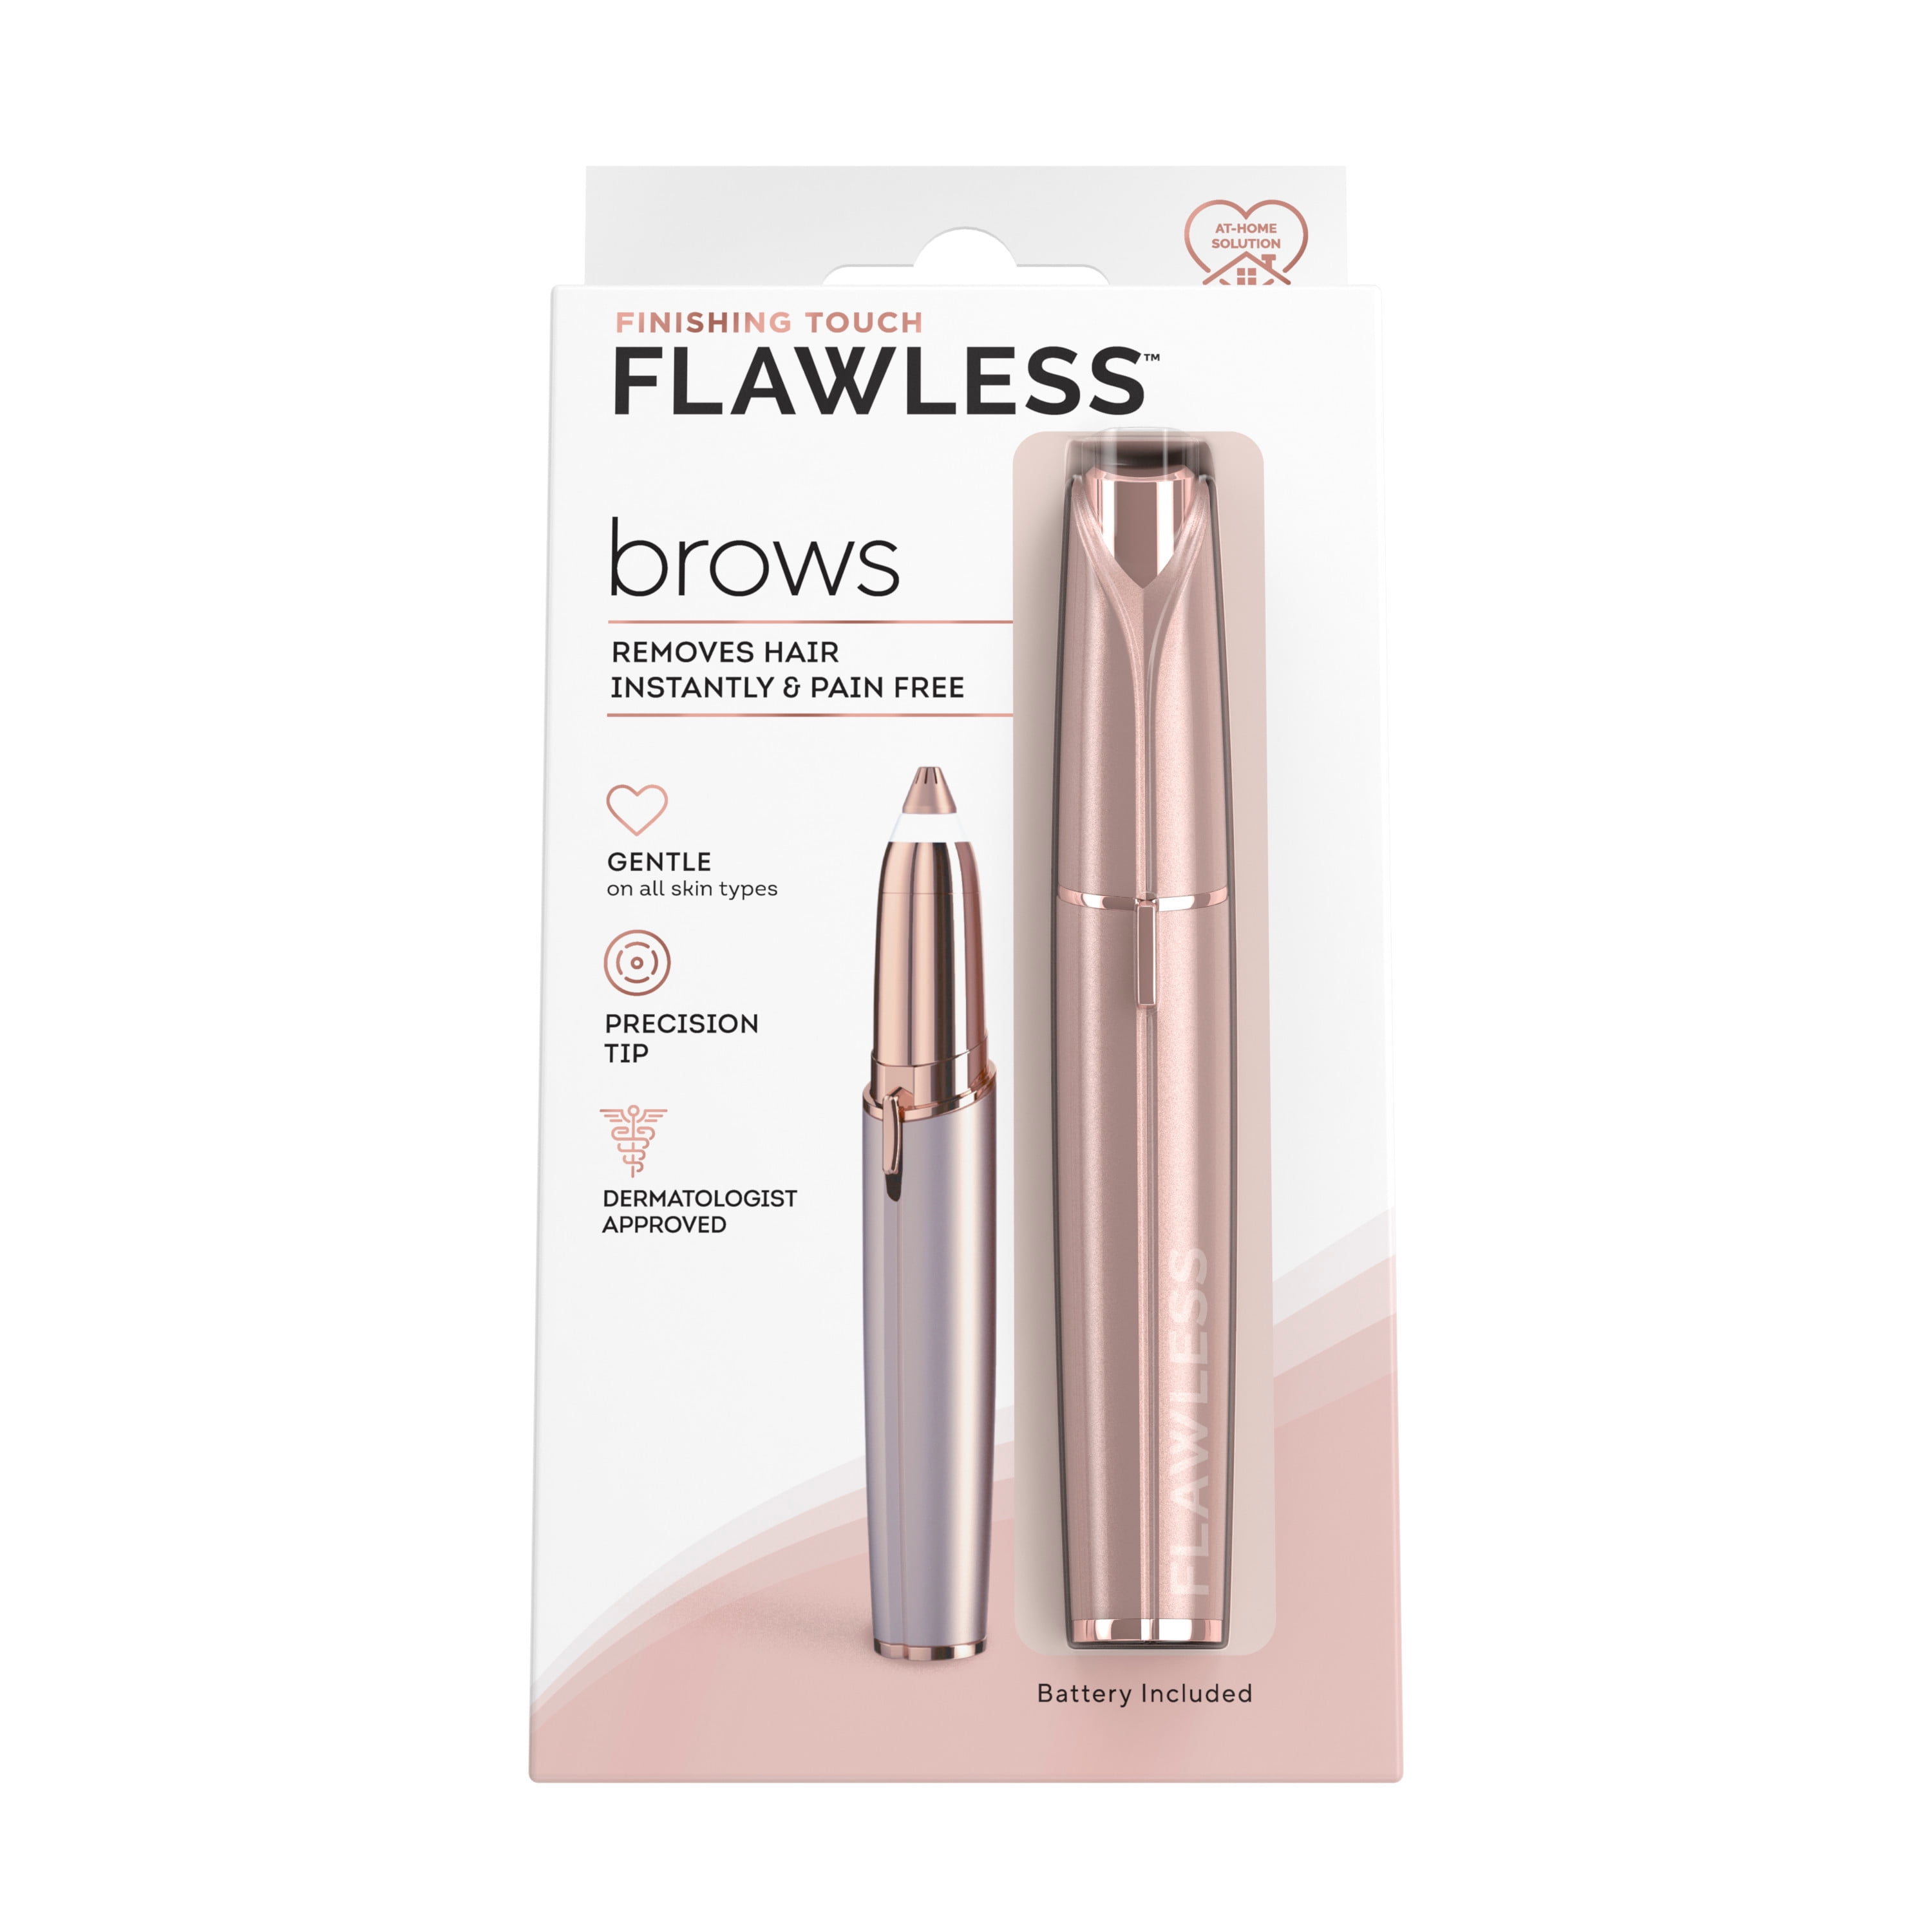 Finishing Touch Flawless Brows Eyebrow Hair Remover for Women, Electric  Eyebrow Razor for Women with LED Light for Instant and Painless Hair  Removal, Blush  Rose Gold